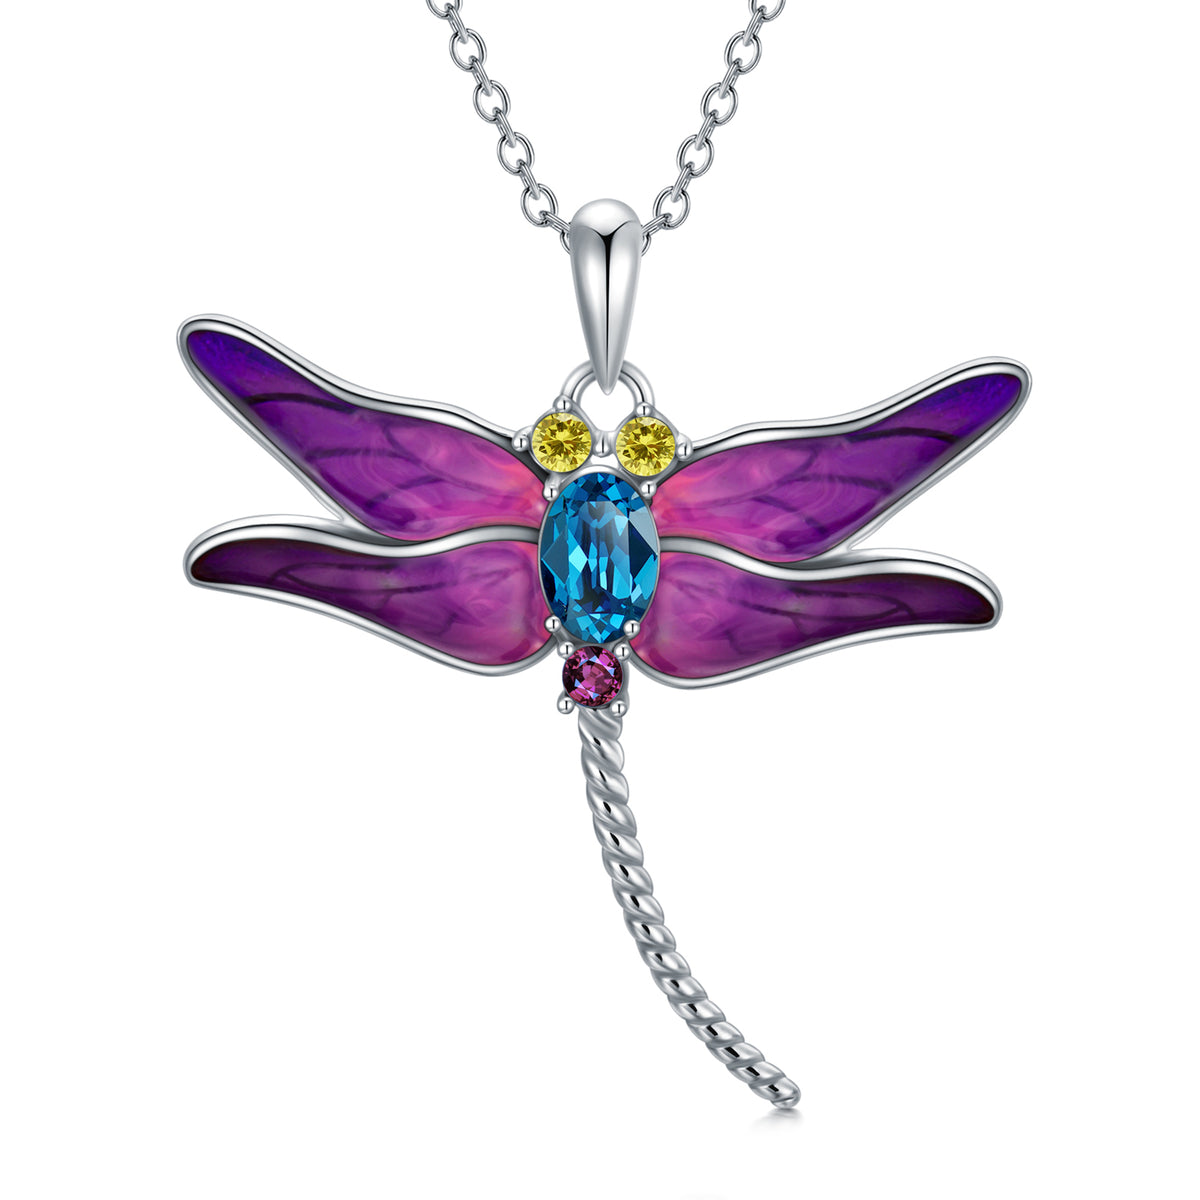 Dragonfly Necklace 925 Sterling Silver Dragonfly Pendant Necklaces with Crystal Jewelry Birthday Gifts for Women Teen Girls